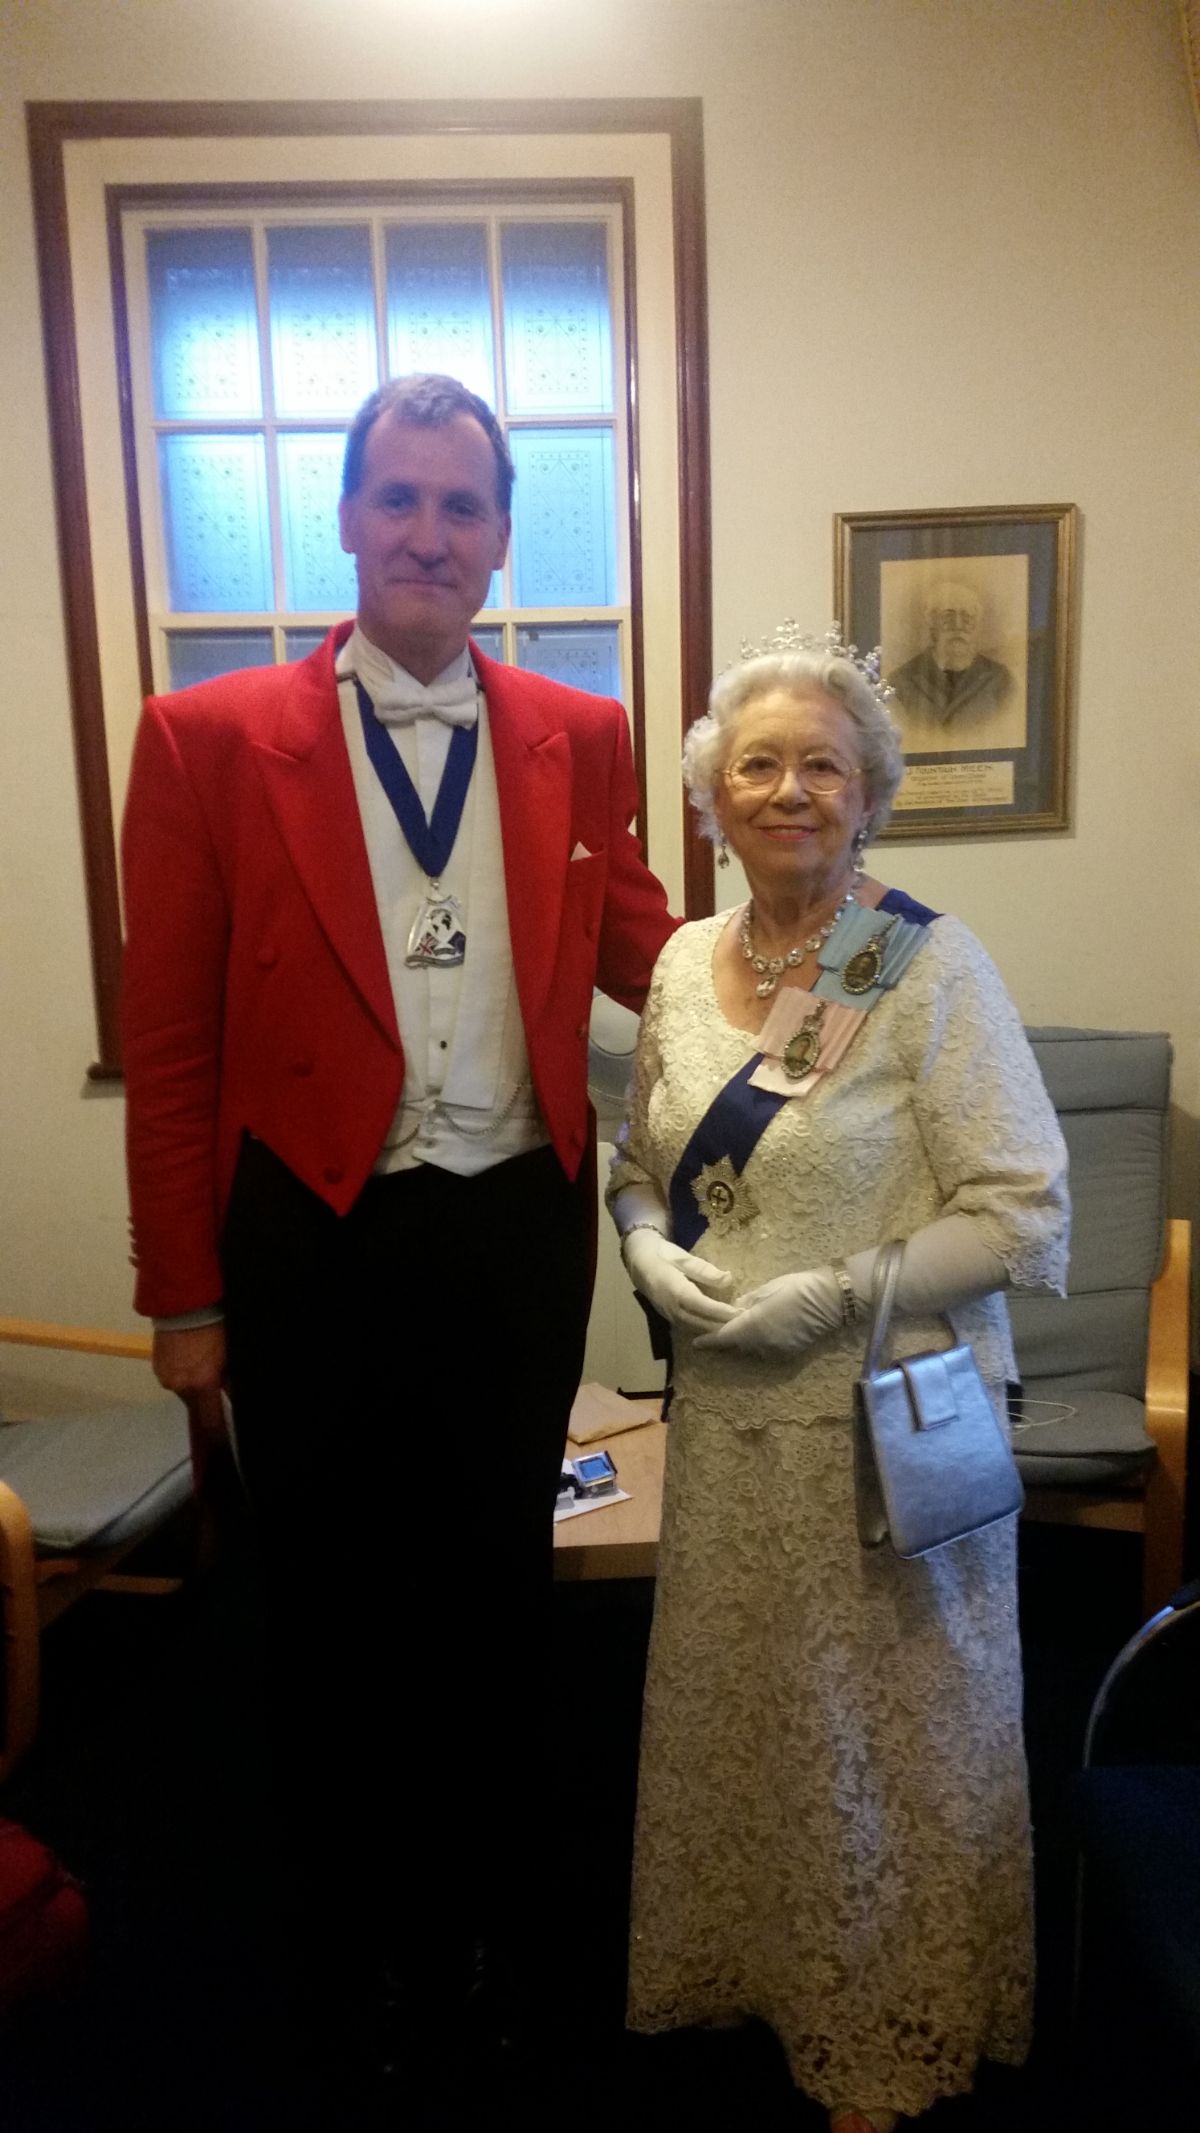 The Man in the Red Coat - Toastmaster James Hasler-Image-68